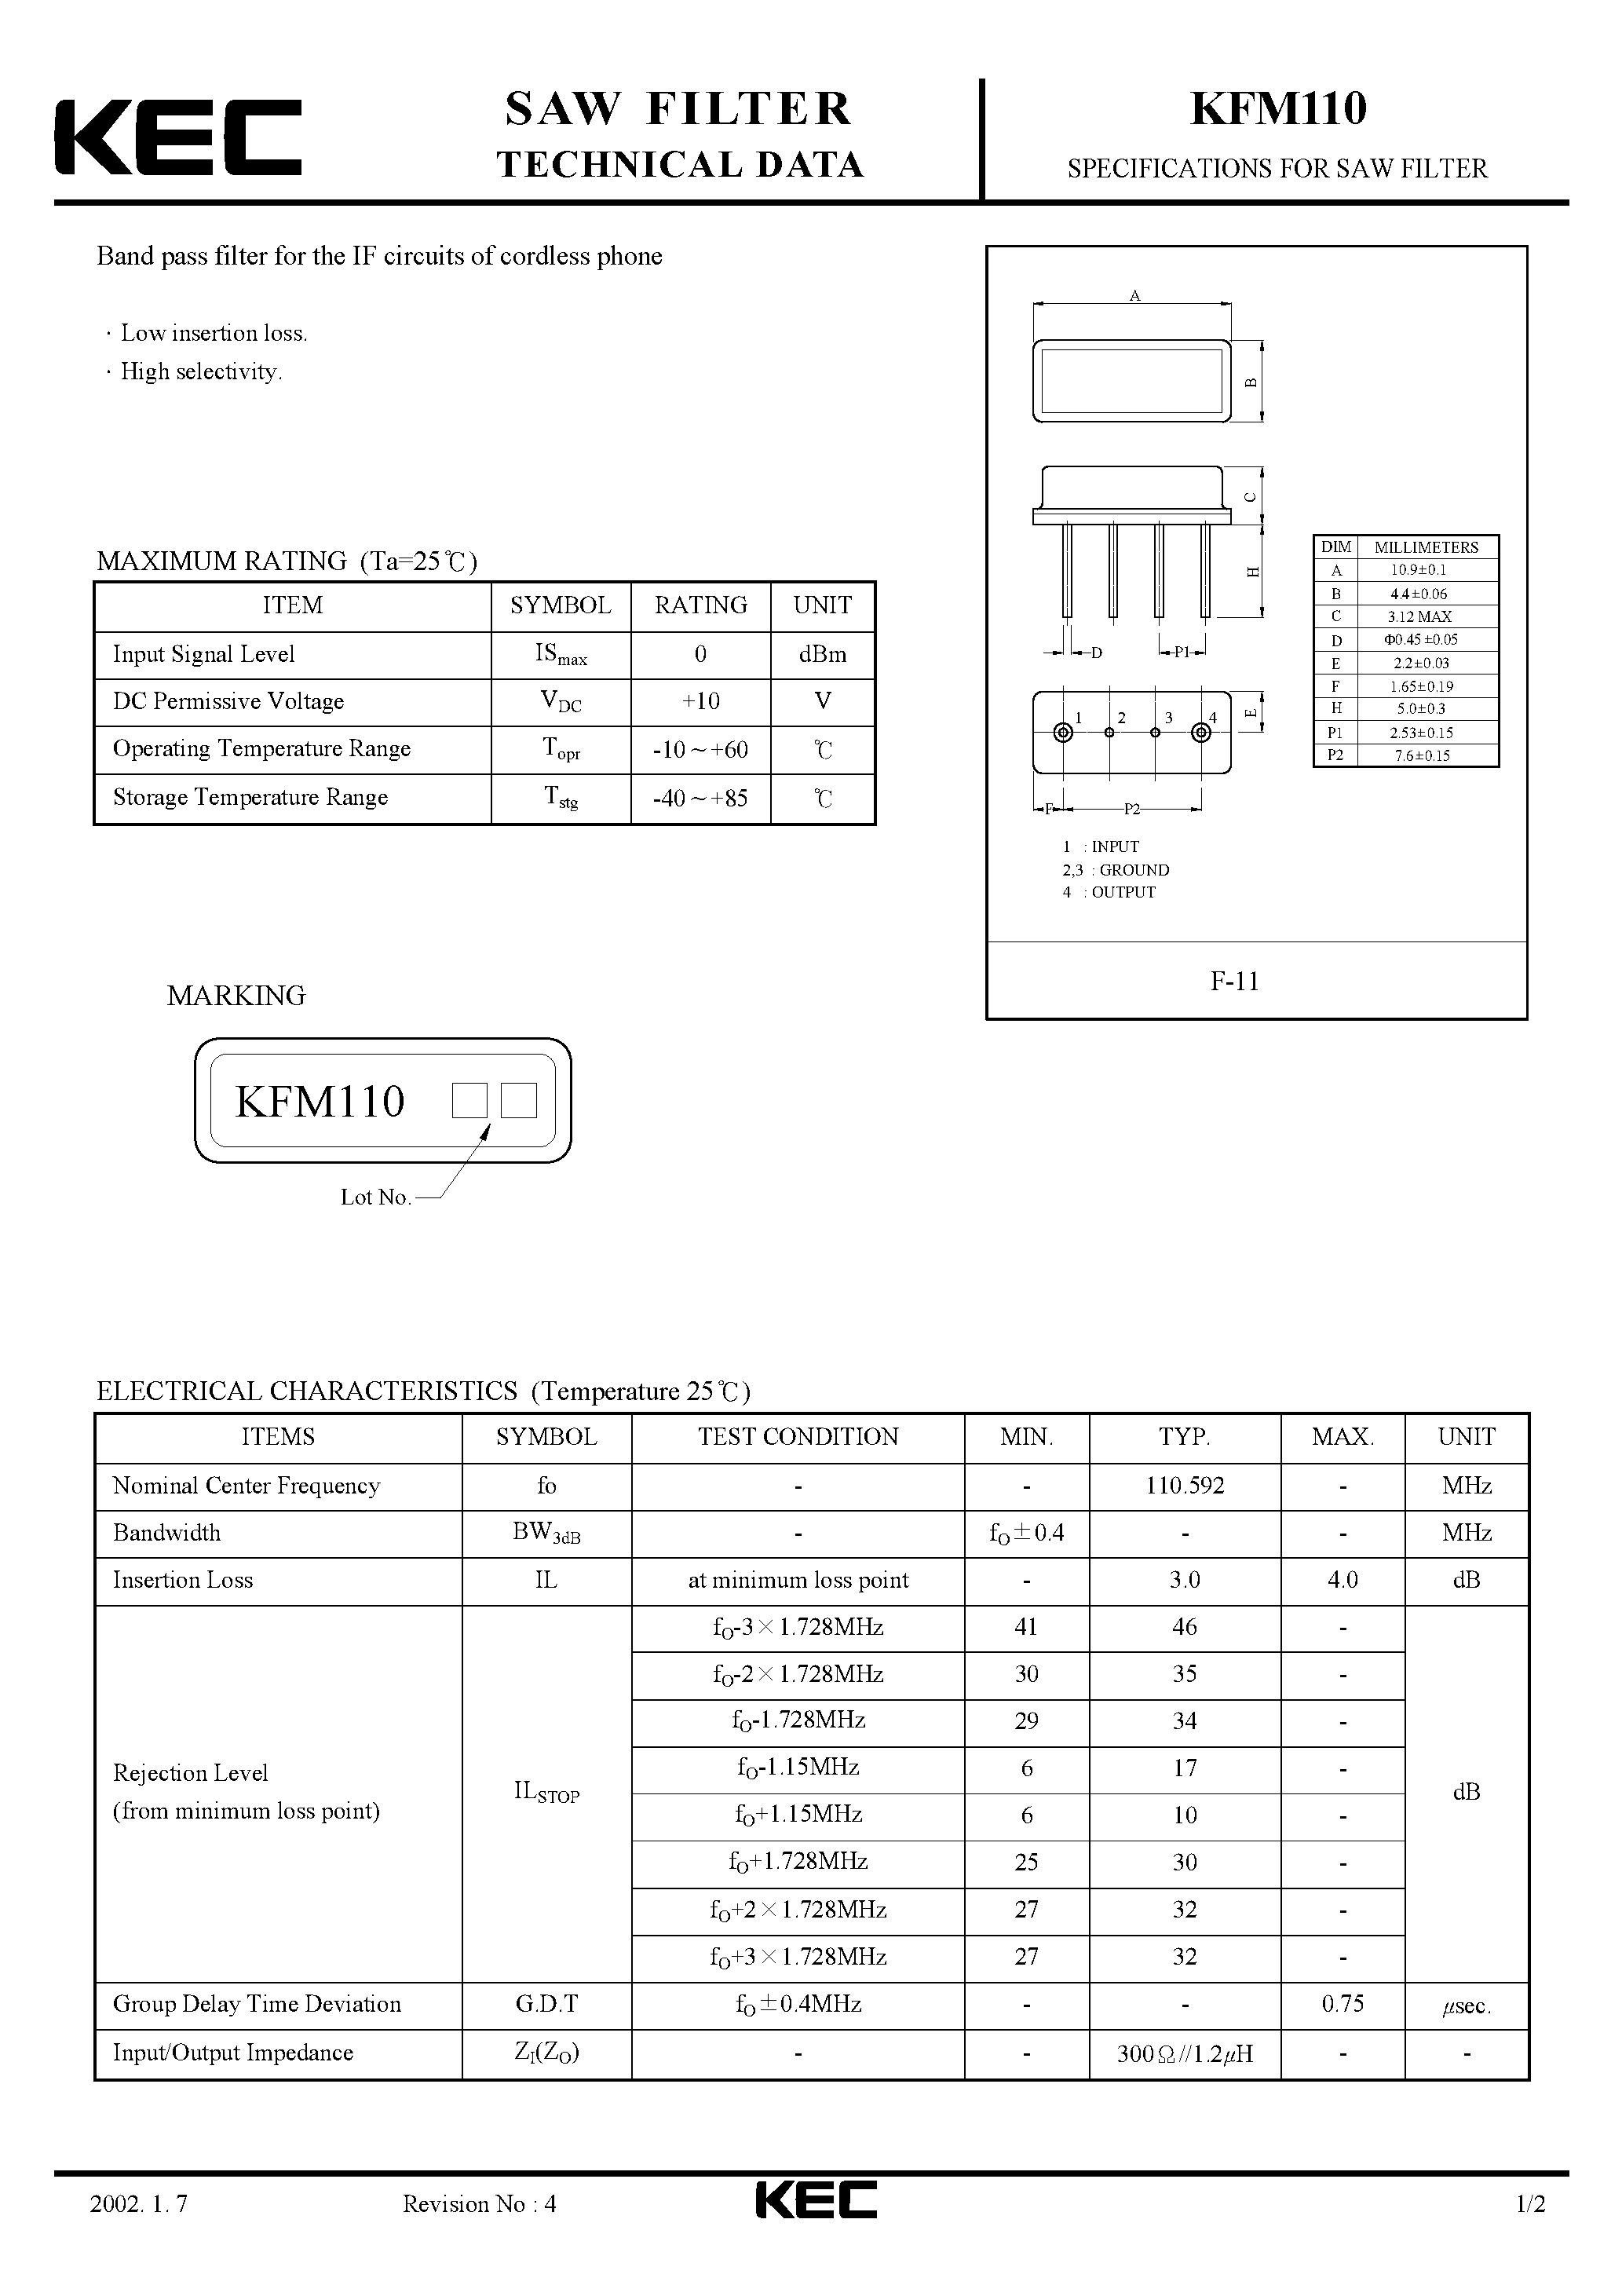 Datasheet KFM110 - SPECIFICATIONS FOR SAW FILTER(BAND PASS FILTERS FOR THR IF CIRCUITS OF CORDLESS PHONE) page 1